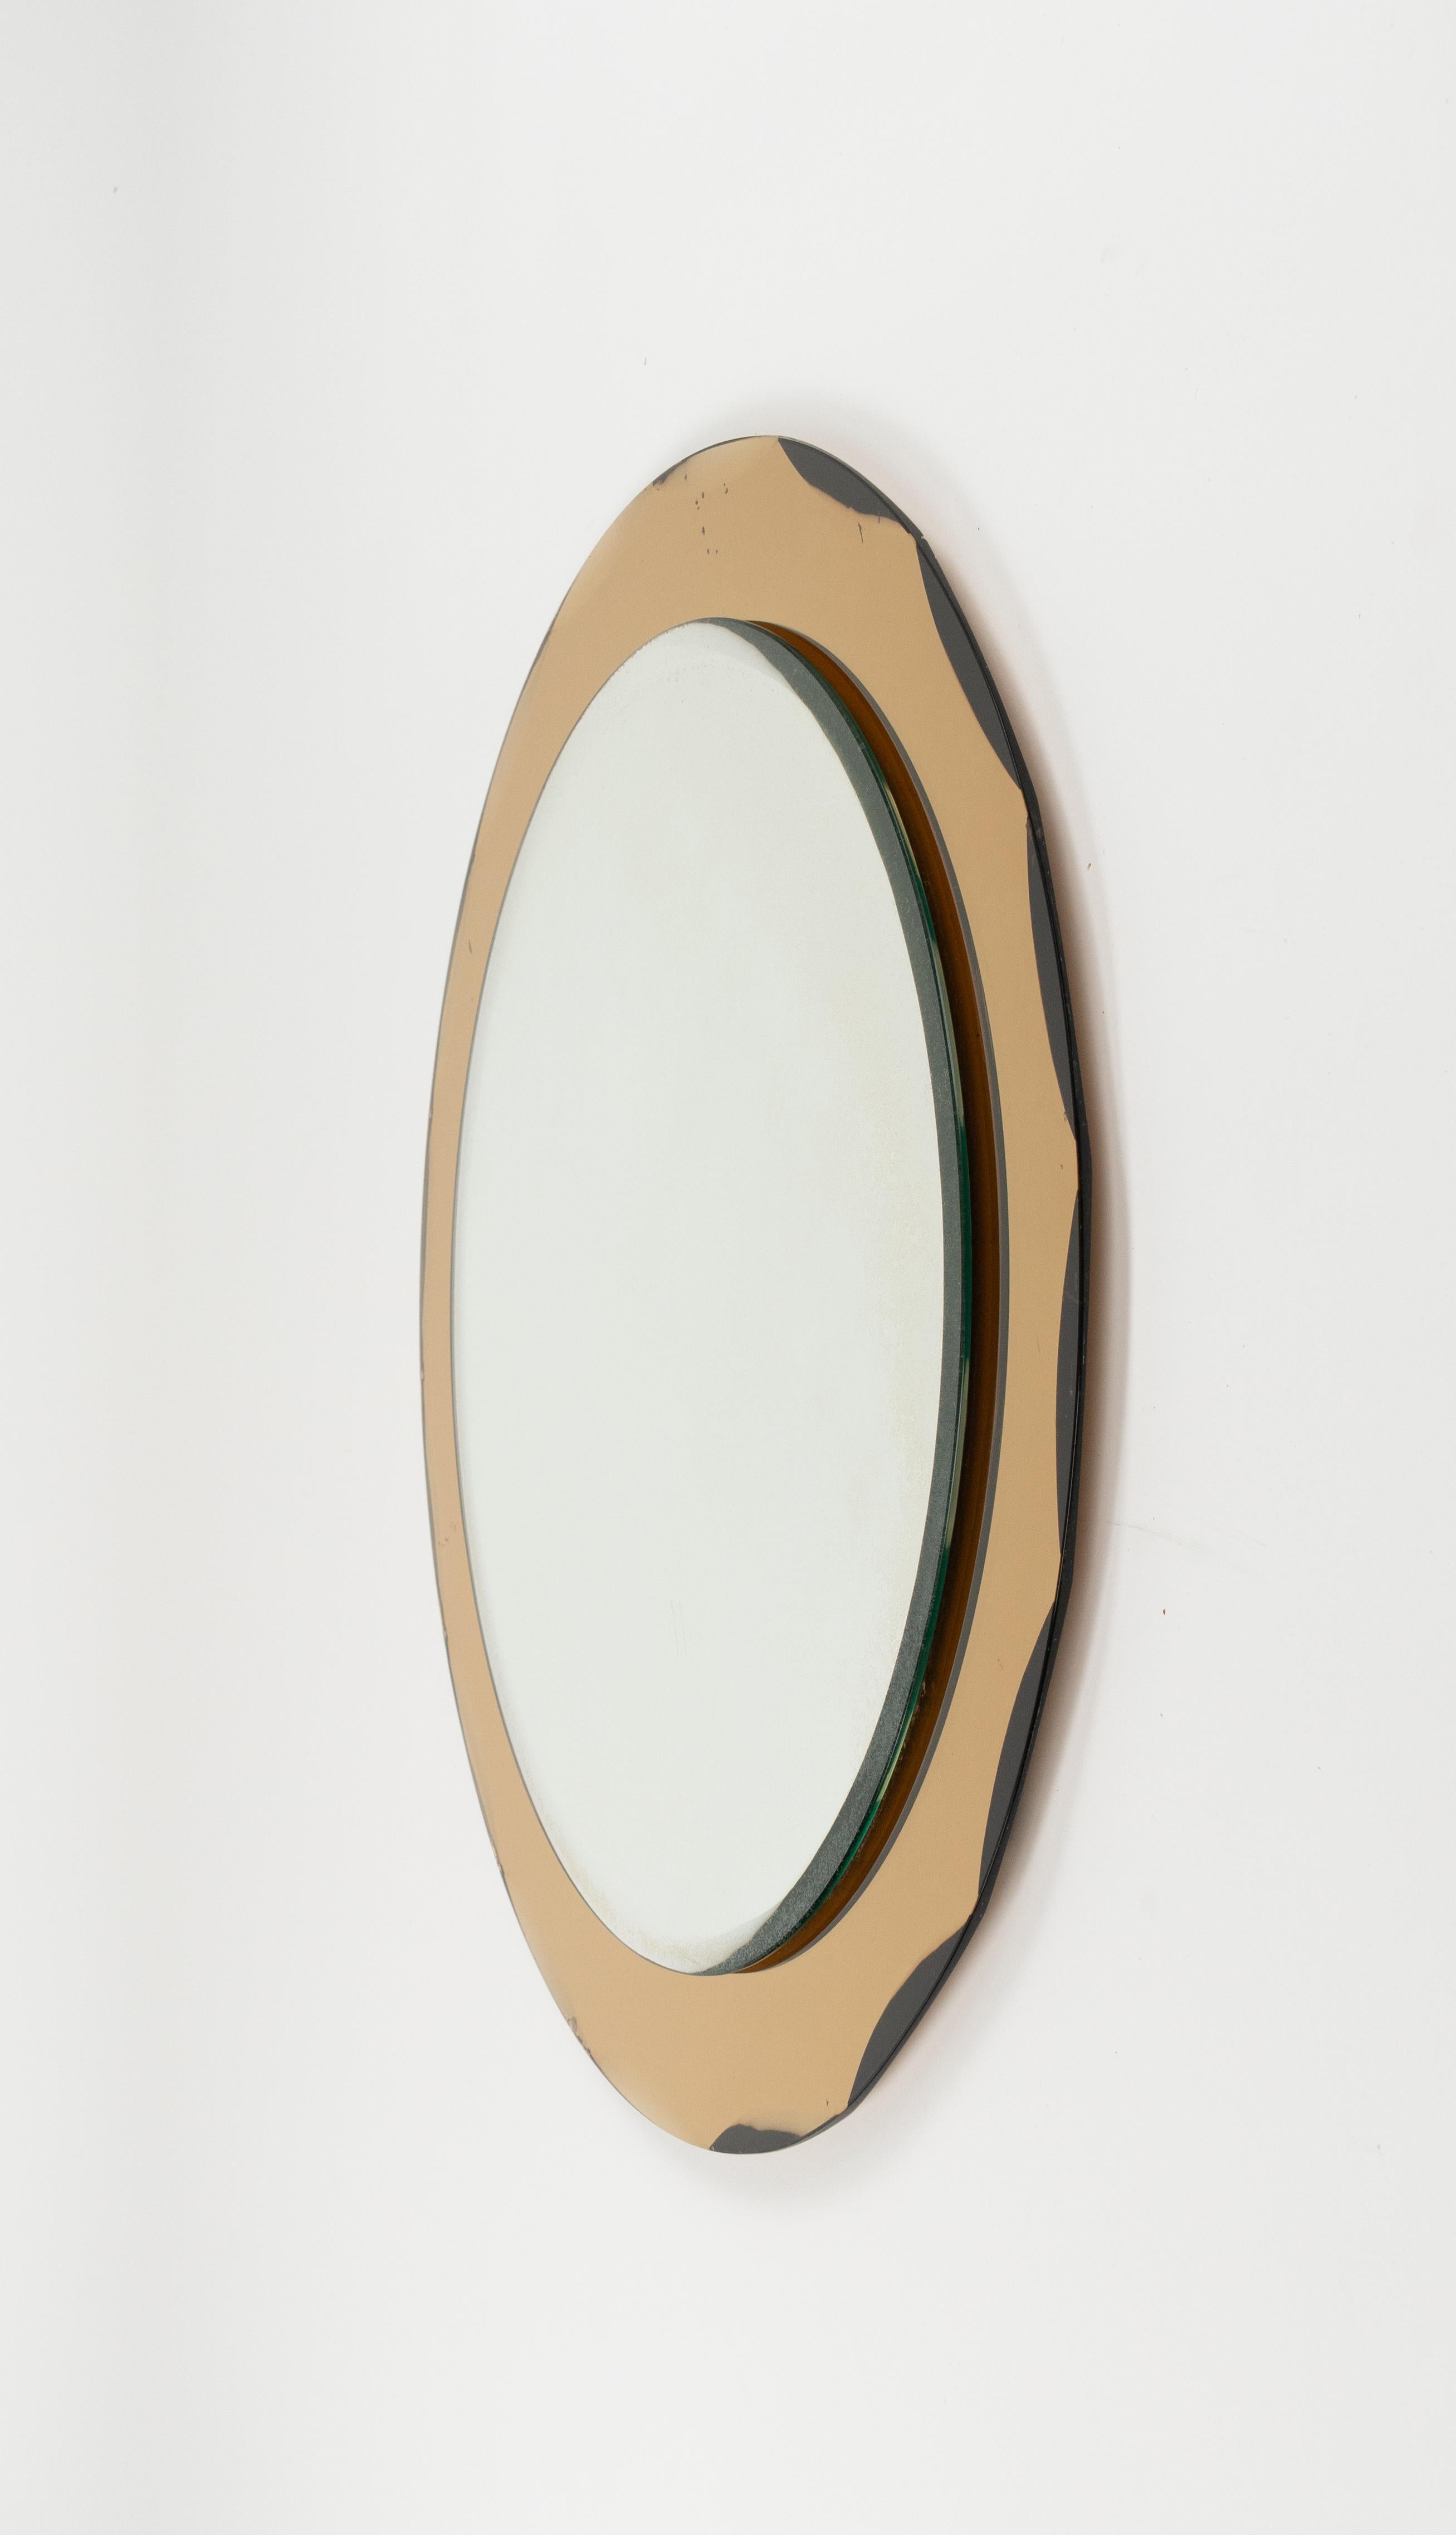 Midcentury Round Yellow Wall Mirror by Metalvetro Galvorame, Italy 1970s For Sale 1